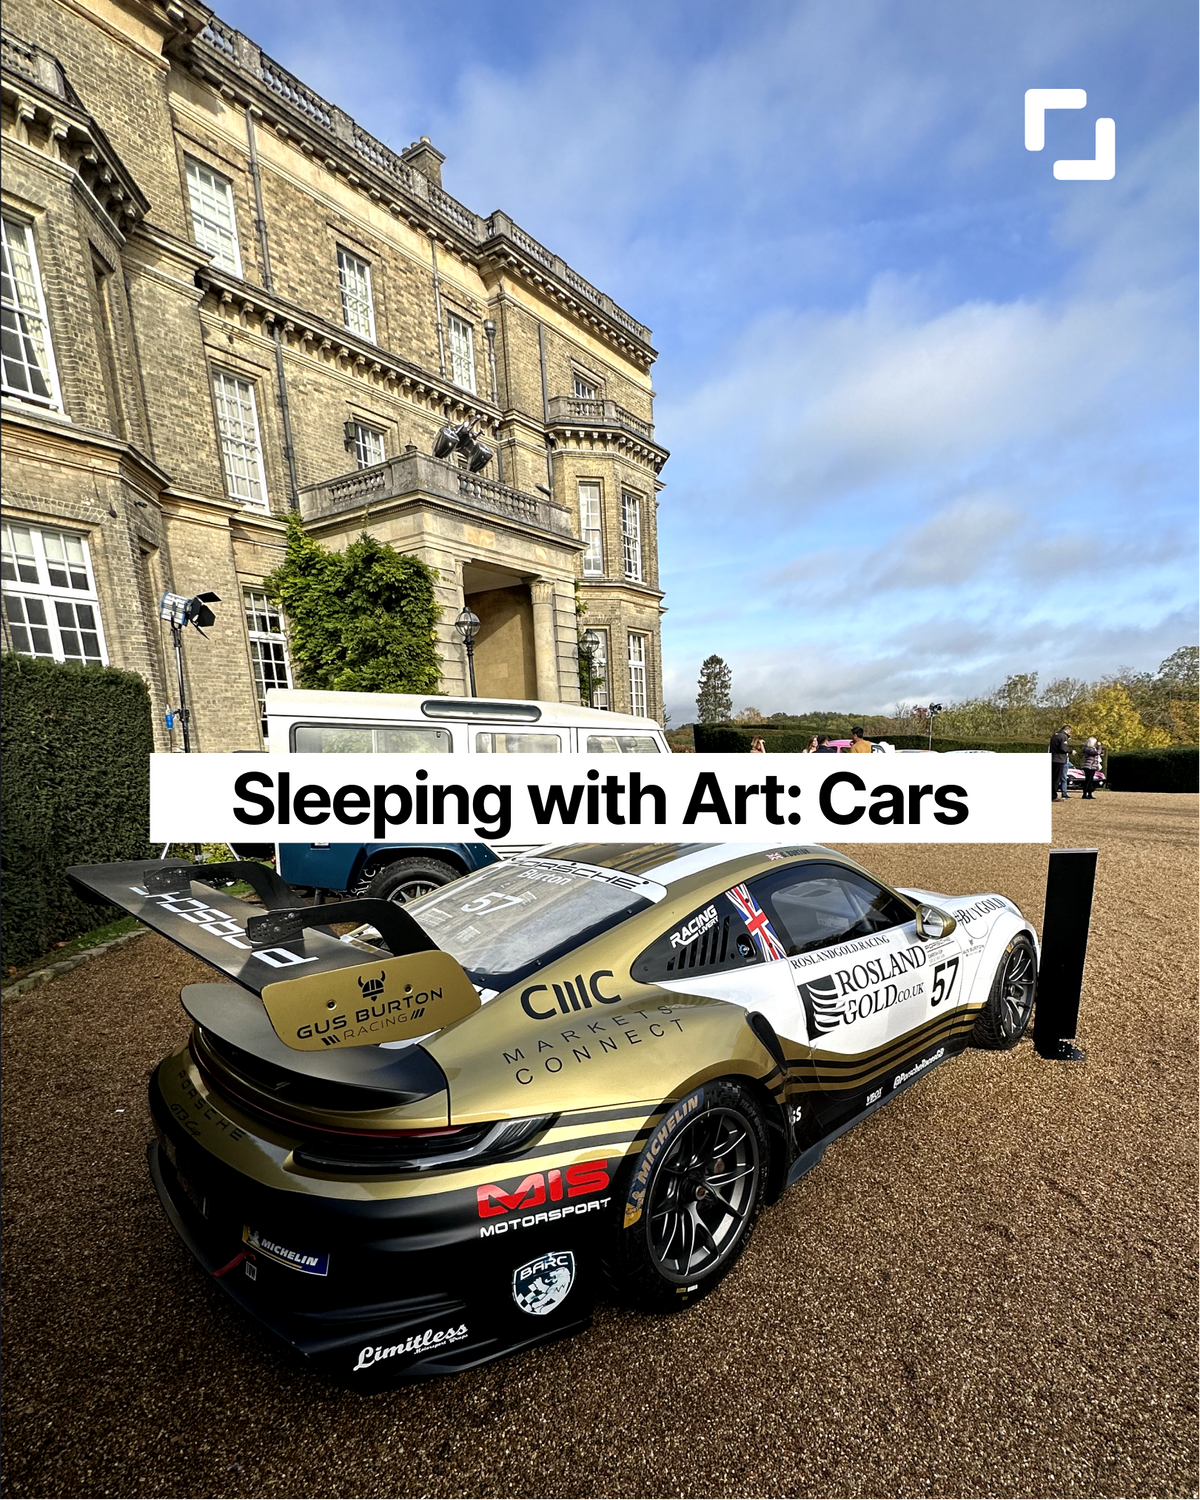 Sleeping with Art: The Art of Cars at Hedsor House